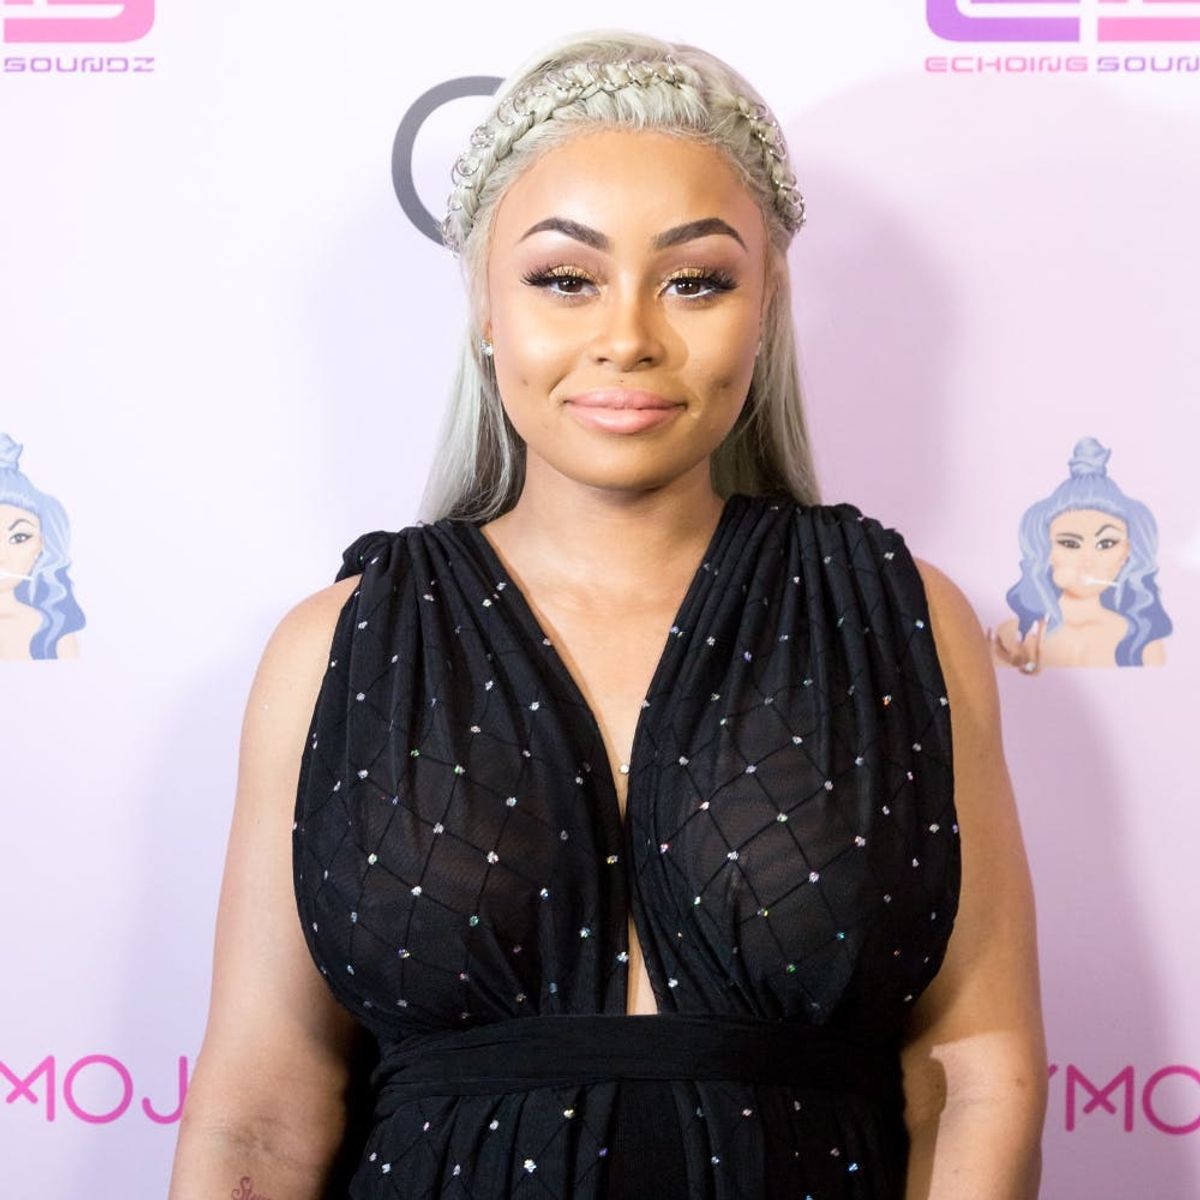 Blac Chyna Reveals If the Kardashian/Jenner Sisters Will Be Bridesmaids